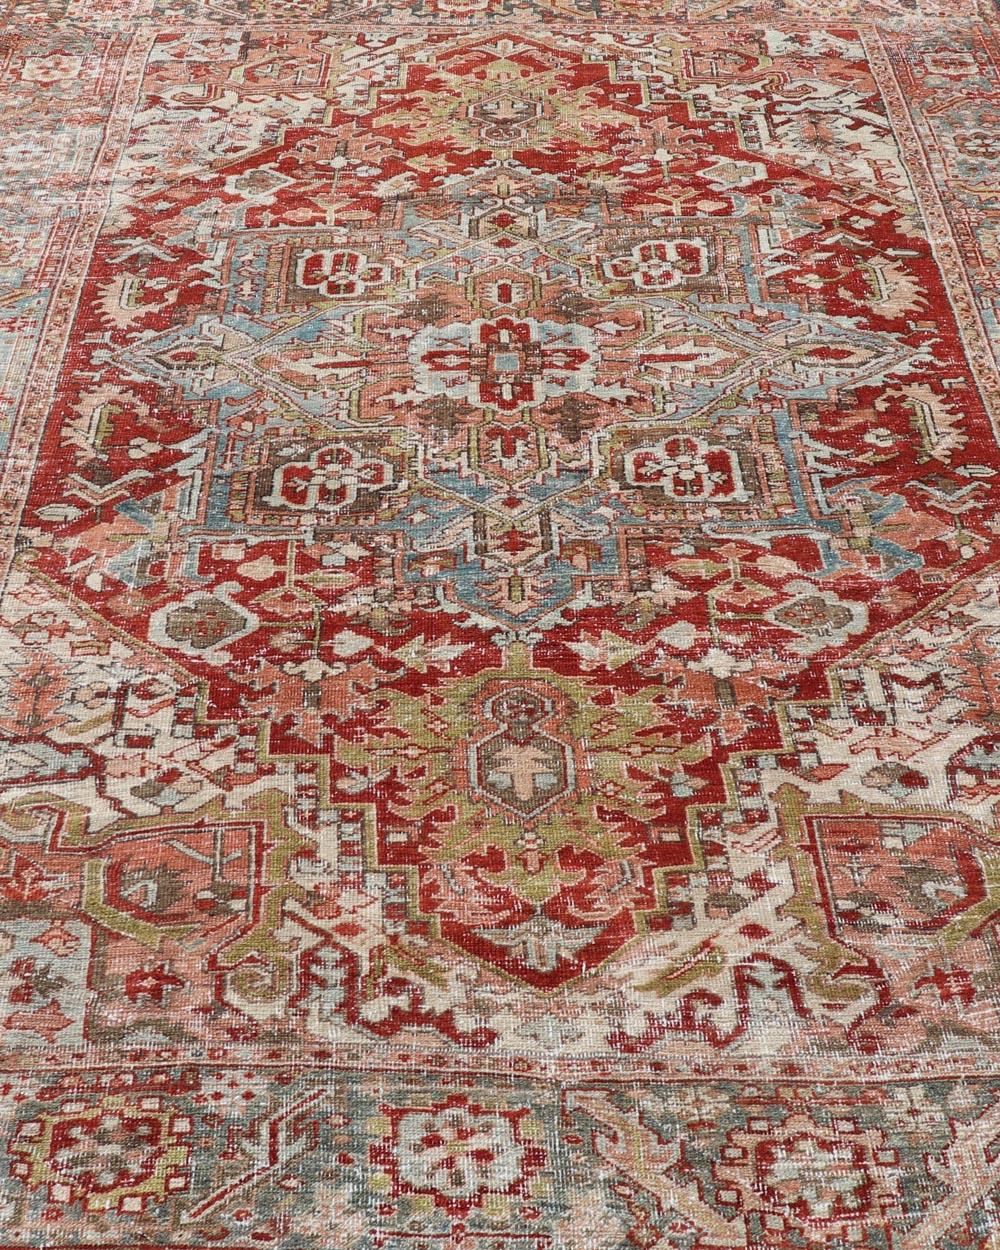 Antique Persian Heriz Rug With Geometric Medallion Design in Red & Soft Colors For Sale 1